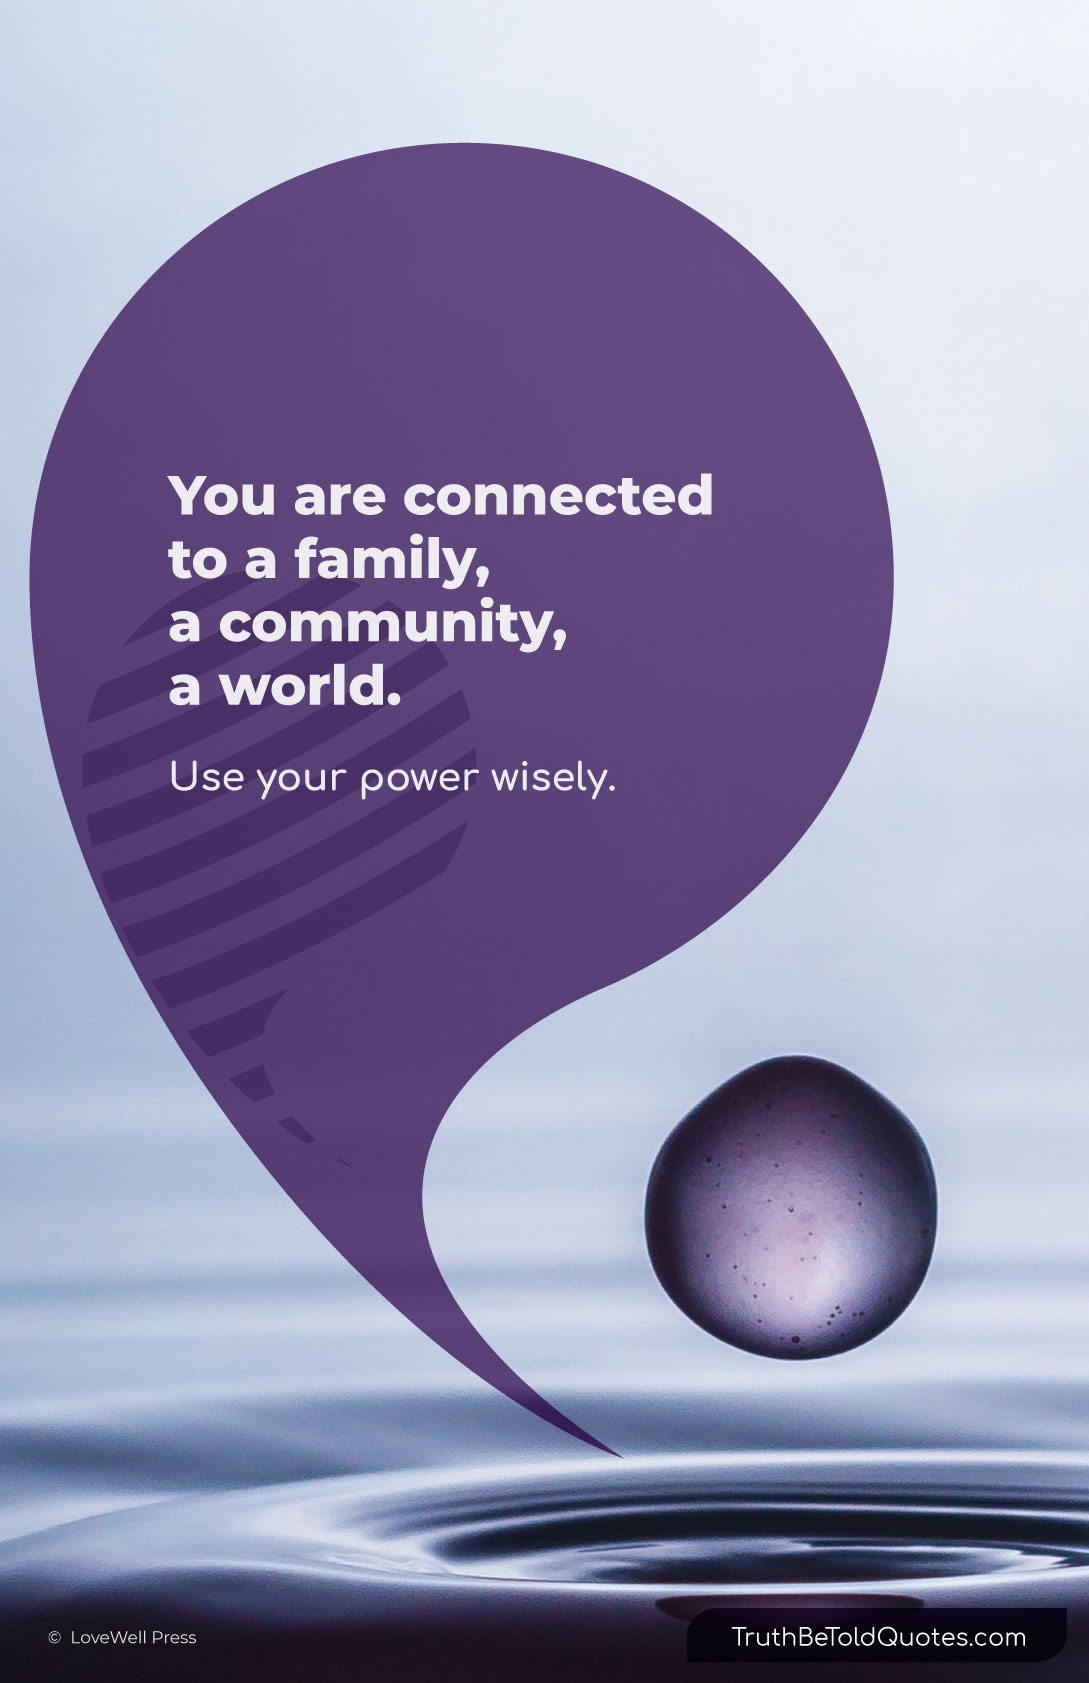 Quote for teens about connection and responsibility- 'You are connected to a family, a community, a world. Use your power wisely.'